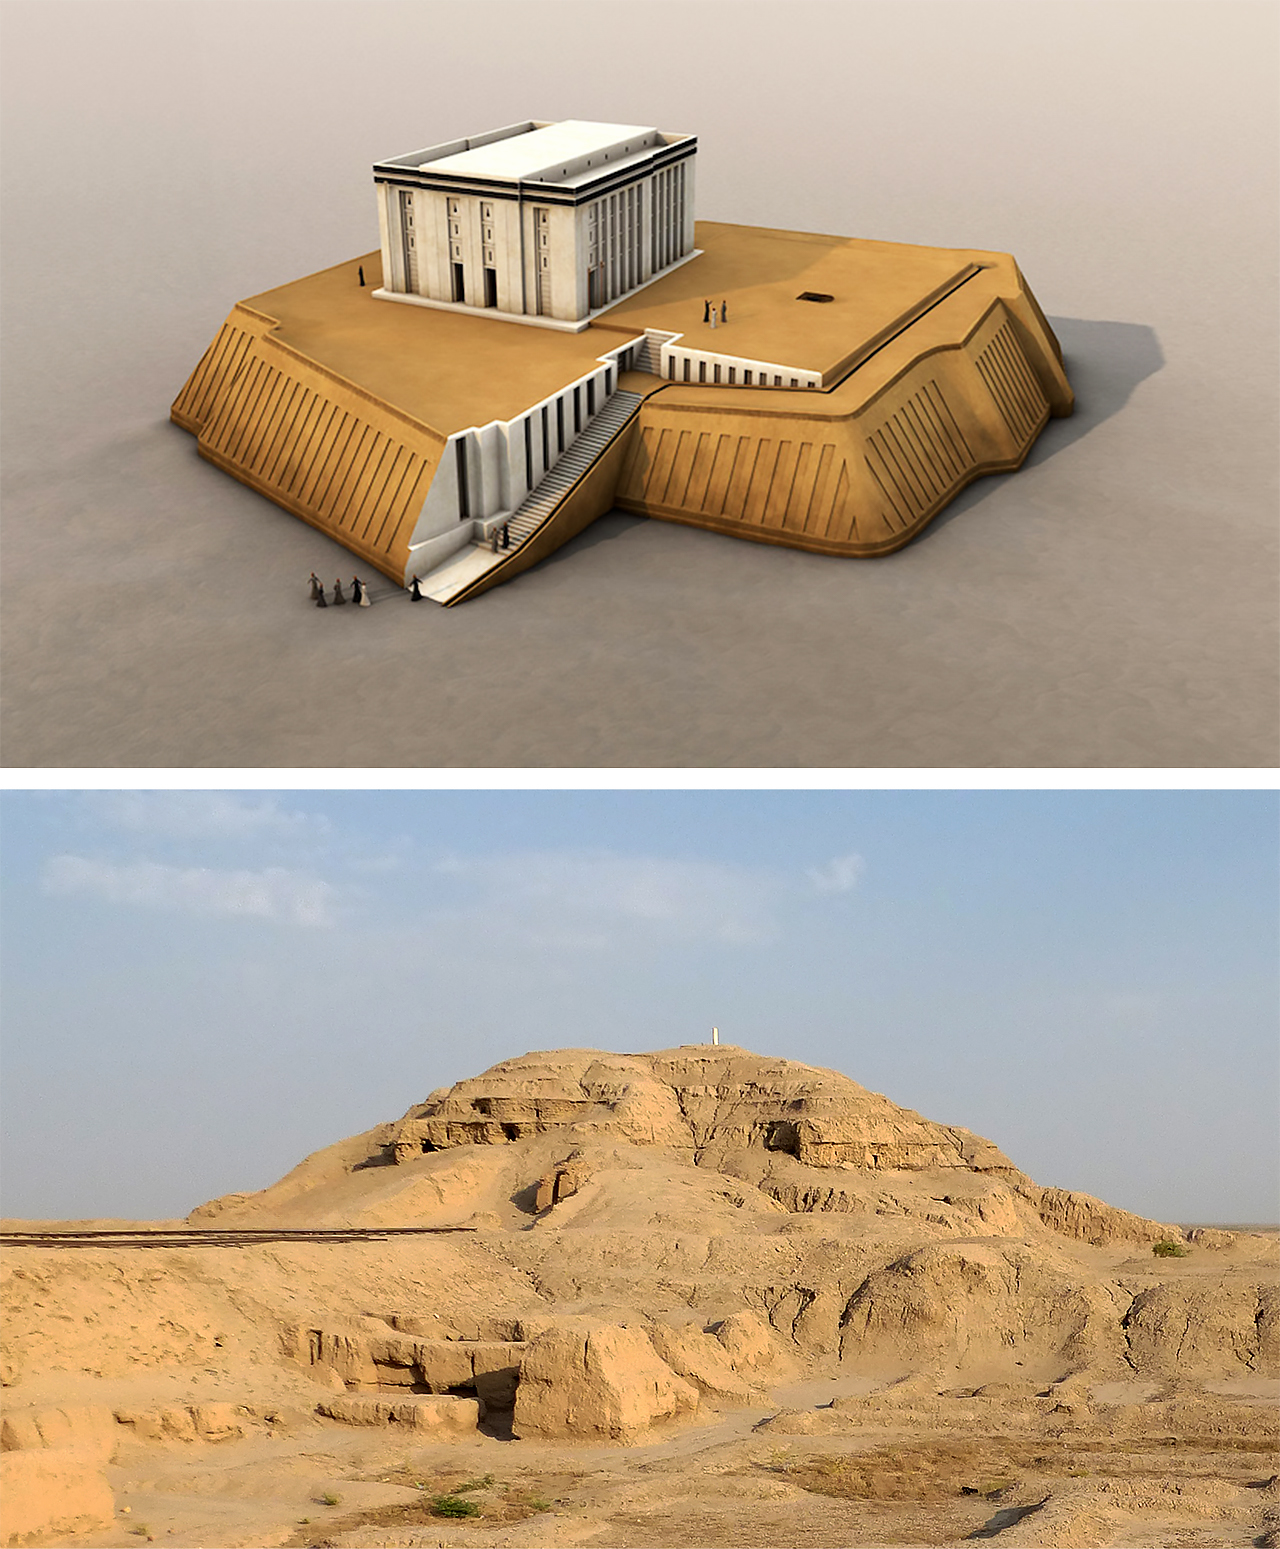 A two-part image of a 3D rendering and a photo of a temple built into a rocky hillside. The 3D rendering shows the temple with a white exterior and a flat roof on a sand-colored platform. The photo shows the temple made of sand-colored stone and partially eroded by weather.